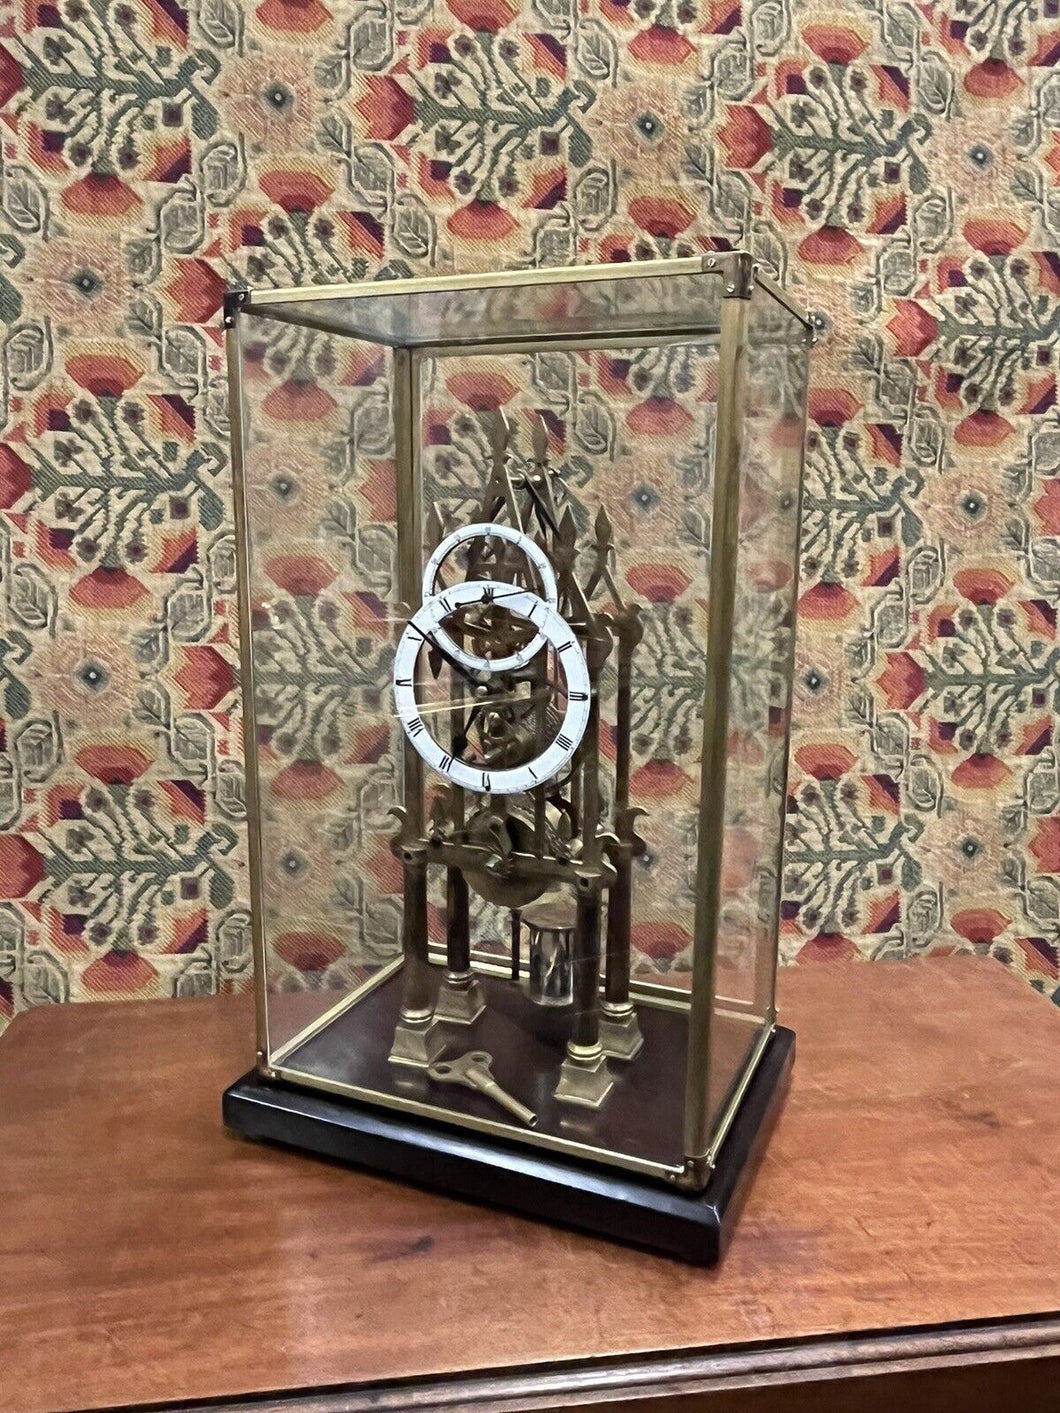 Chain Fusee Cathedral Skeleton Clock With Case And Key